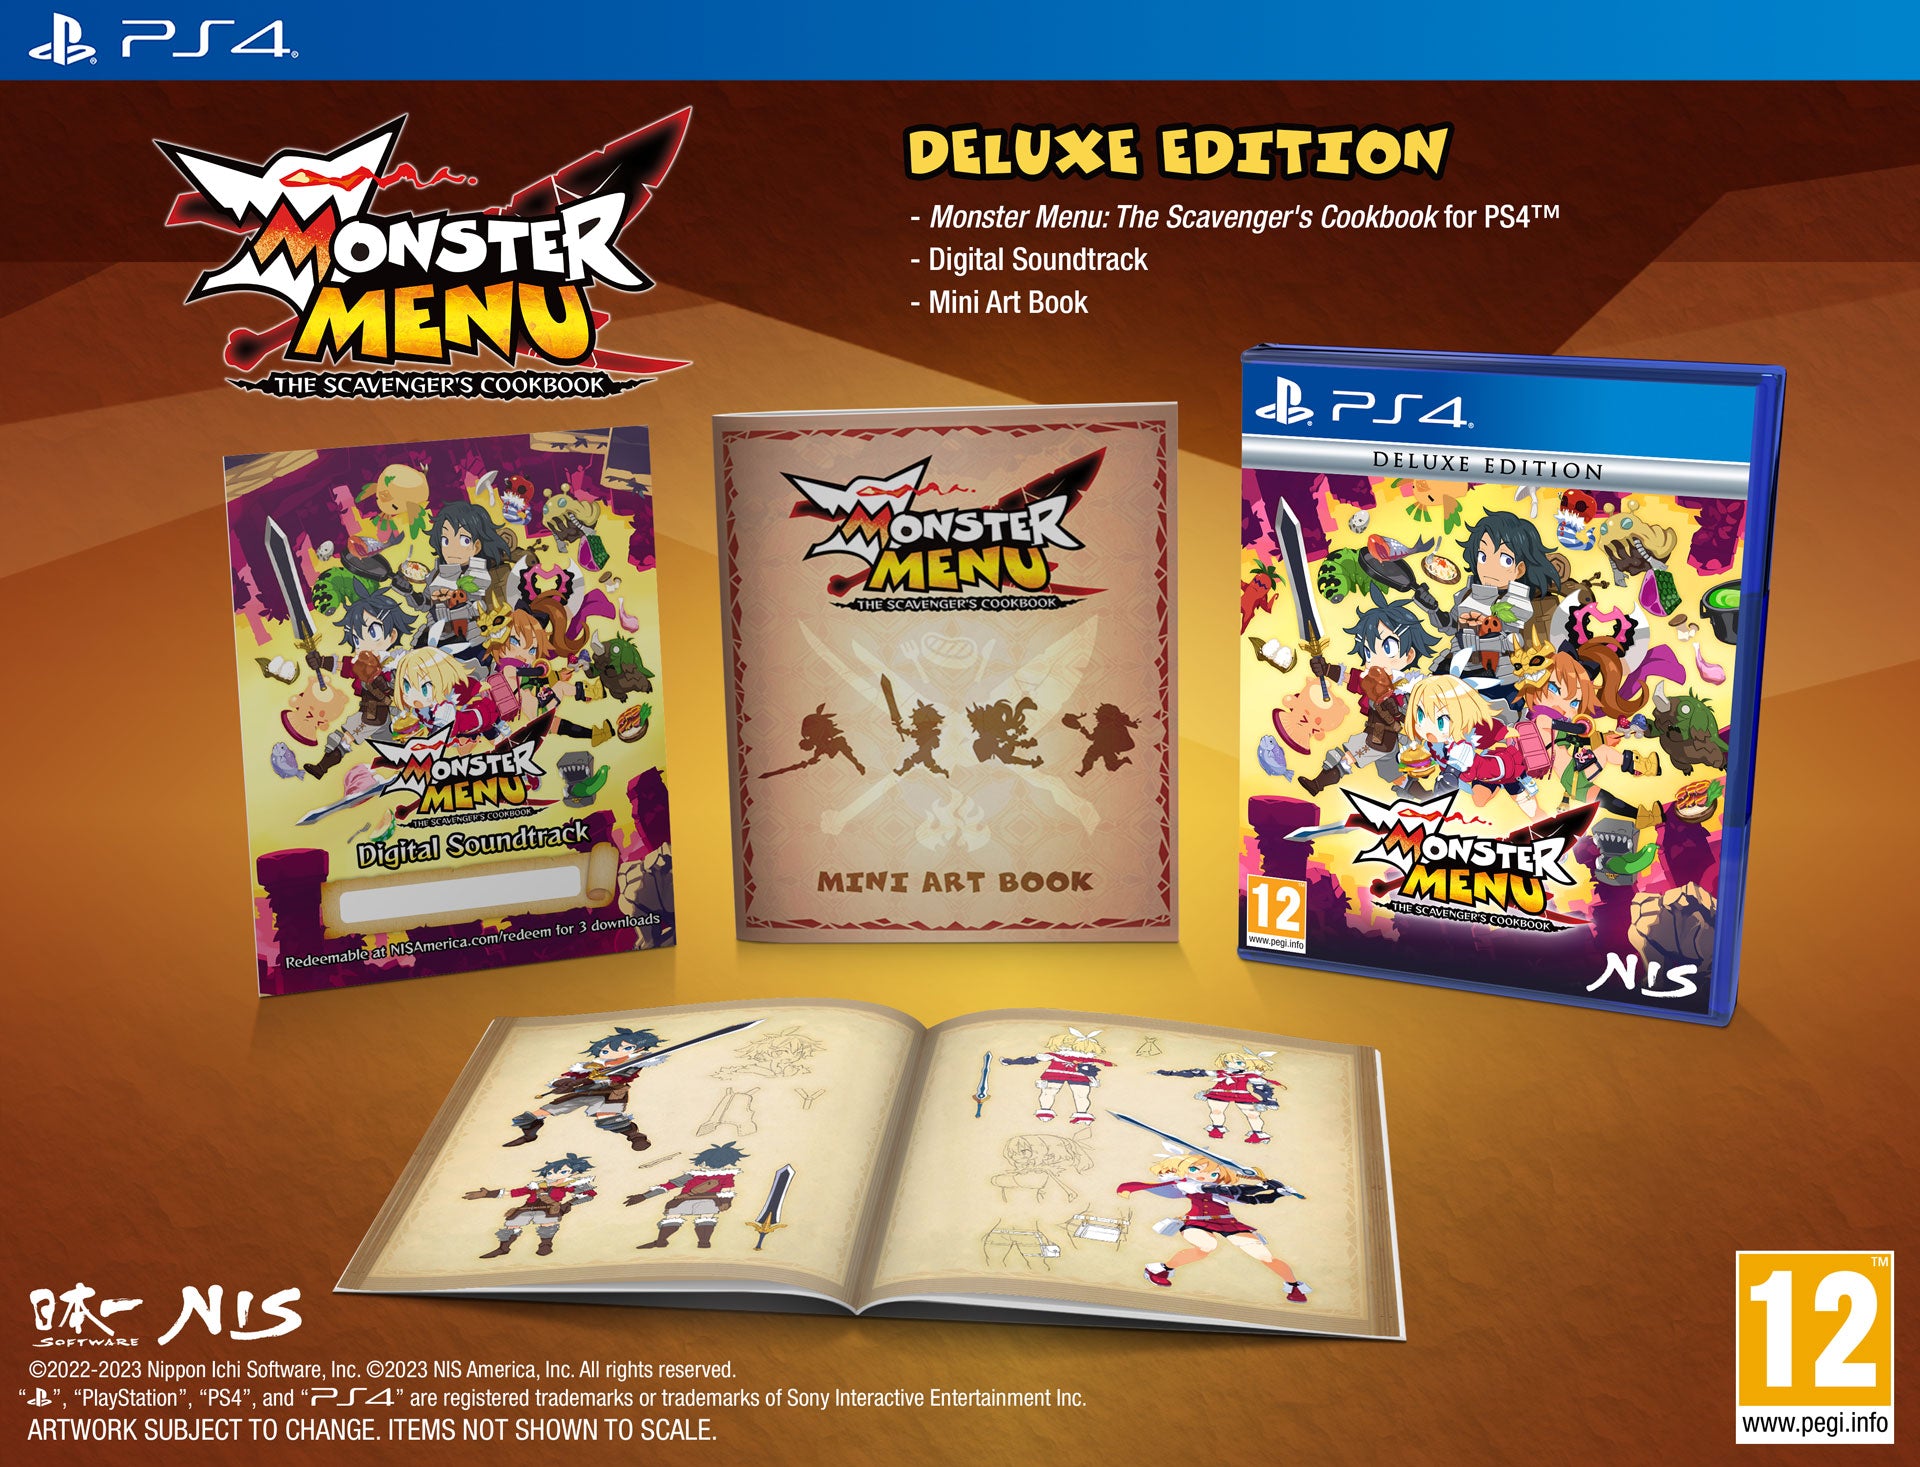 Monster Menu: The Scavenger's Cookbook - Deluxe Edition - PS4®